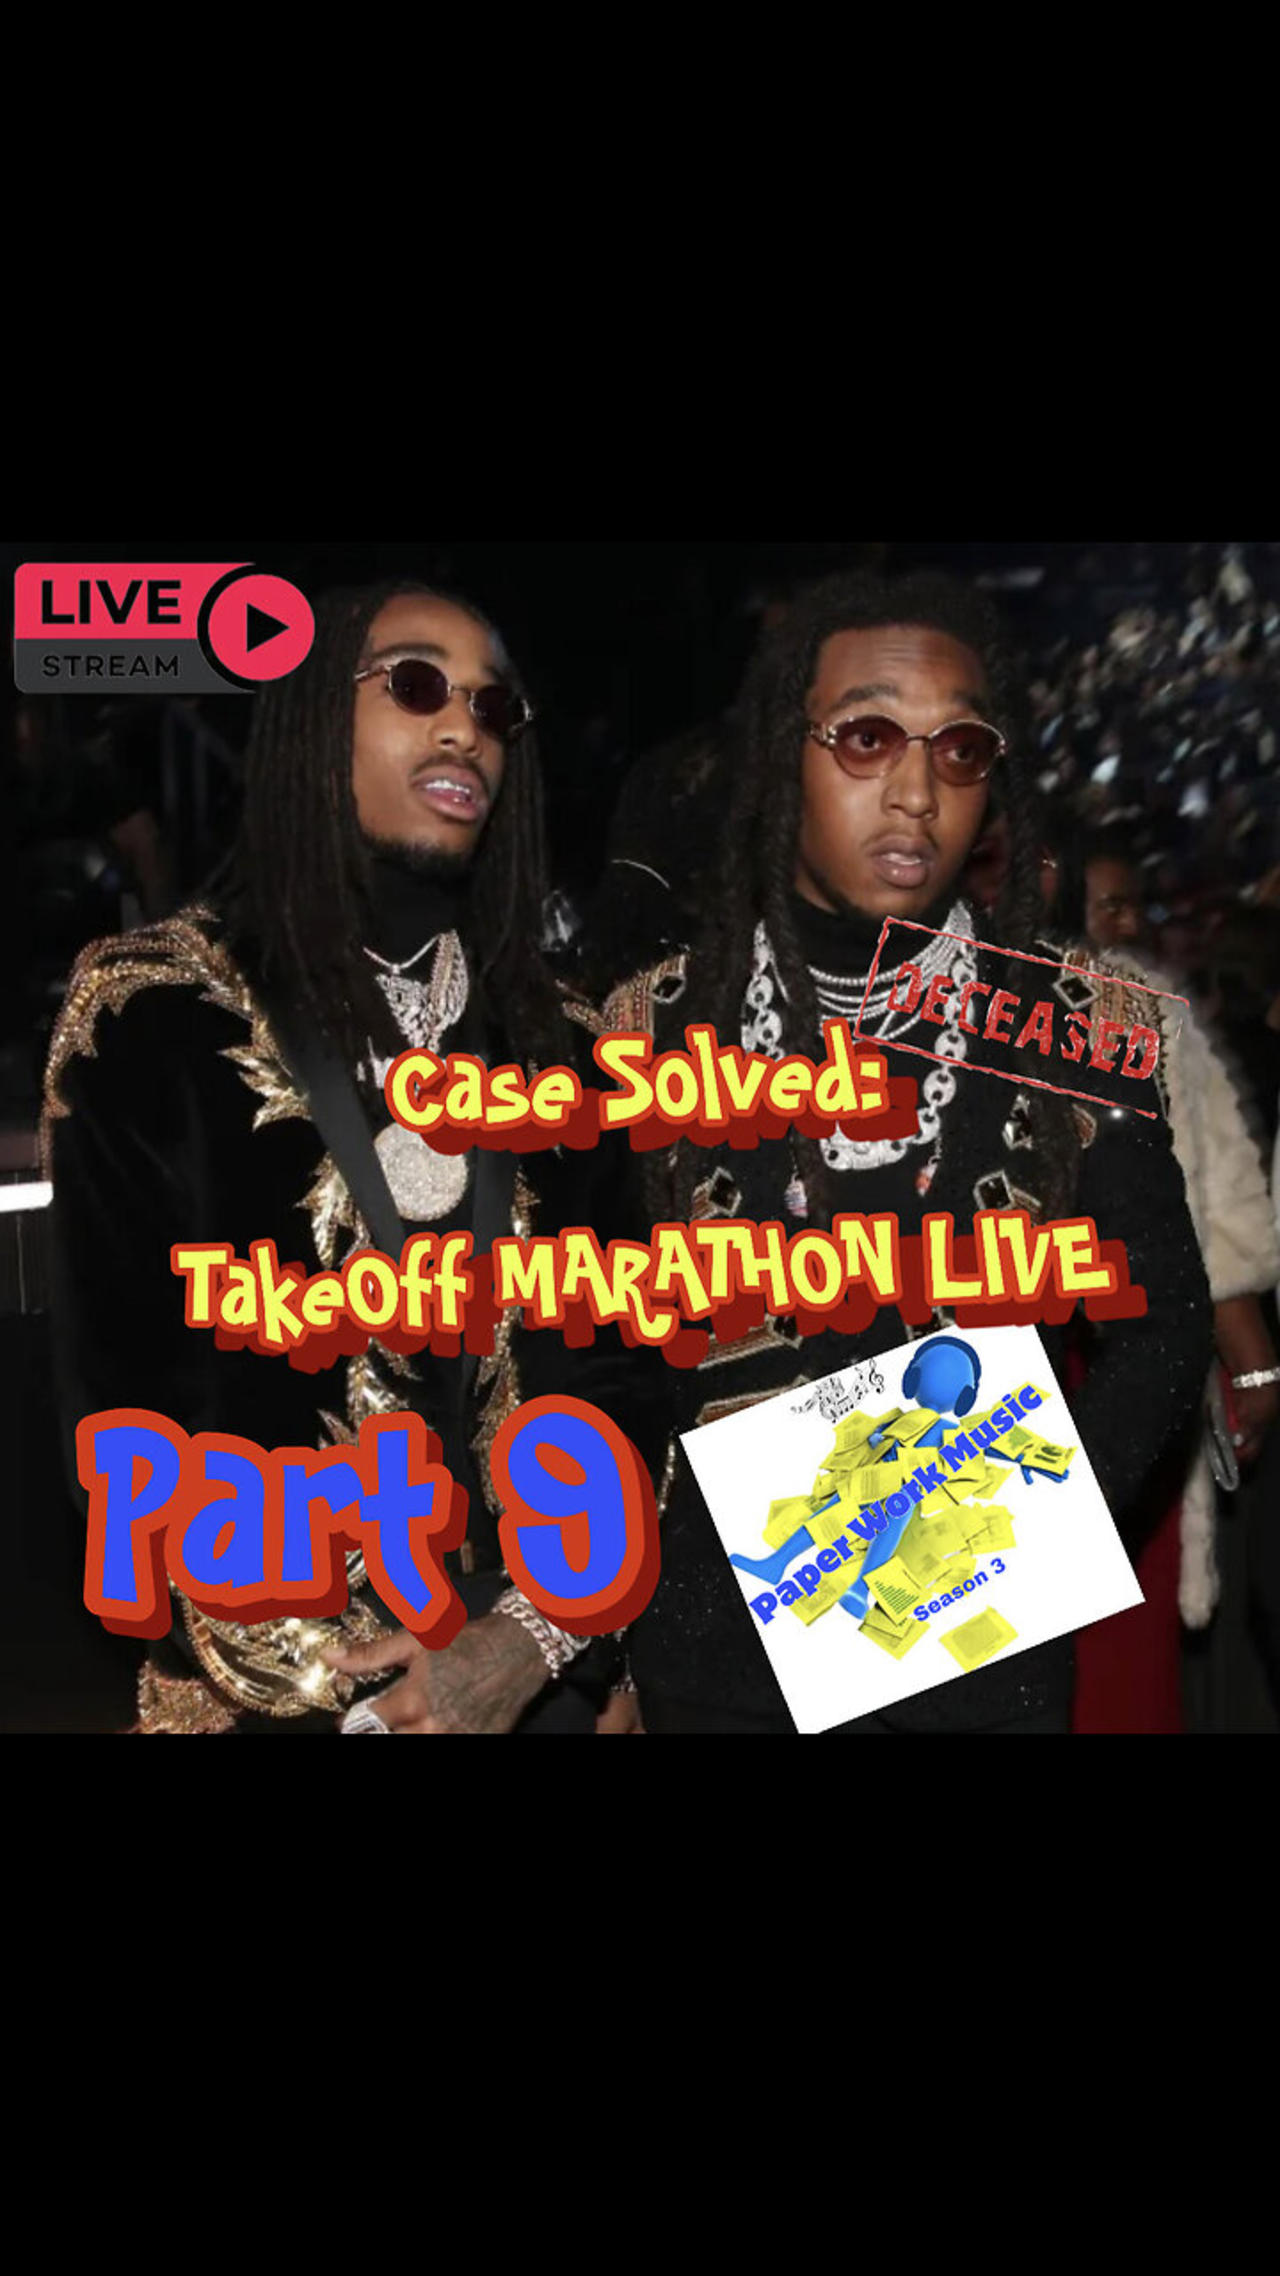 LIVE: Part 9 CASE SOLVED by Paper Work Party: TakeOff "FLASHBACK" MARATHON